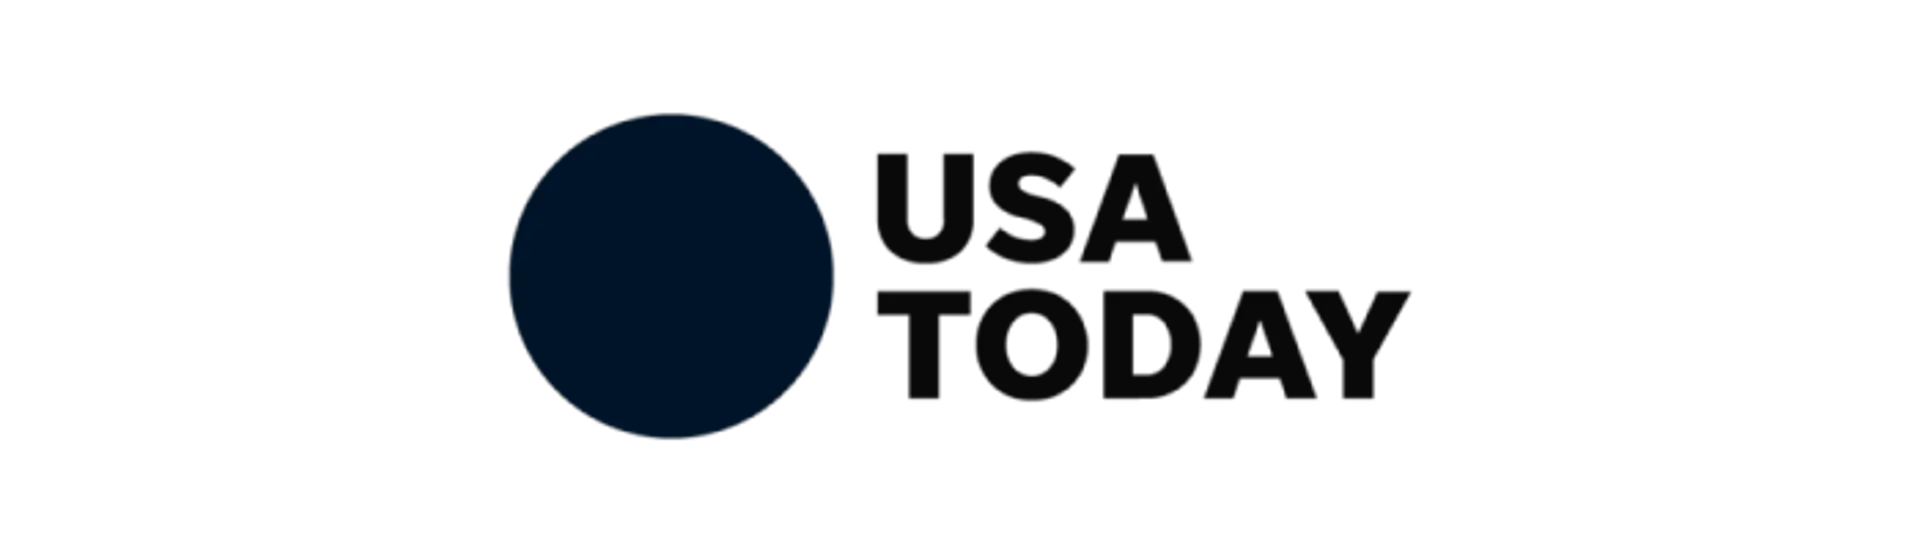 USA Today logo with a dark background featuring a blue circle above stylized text.